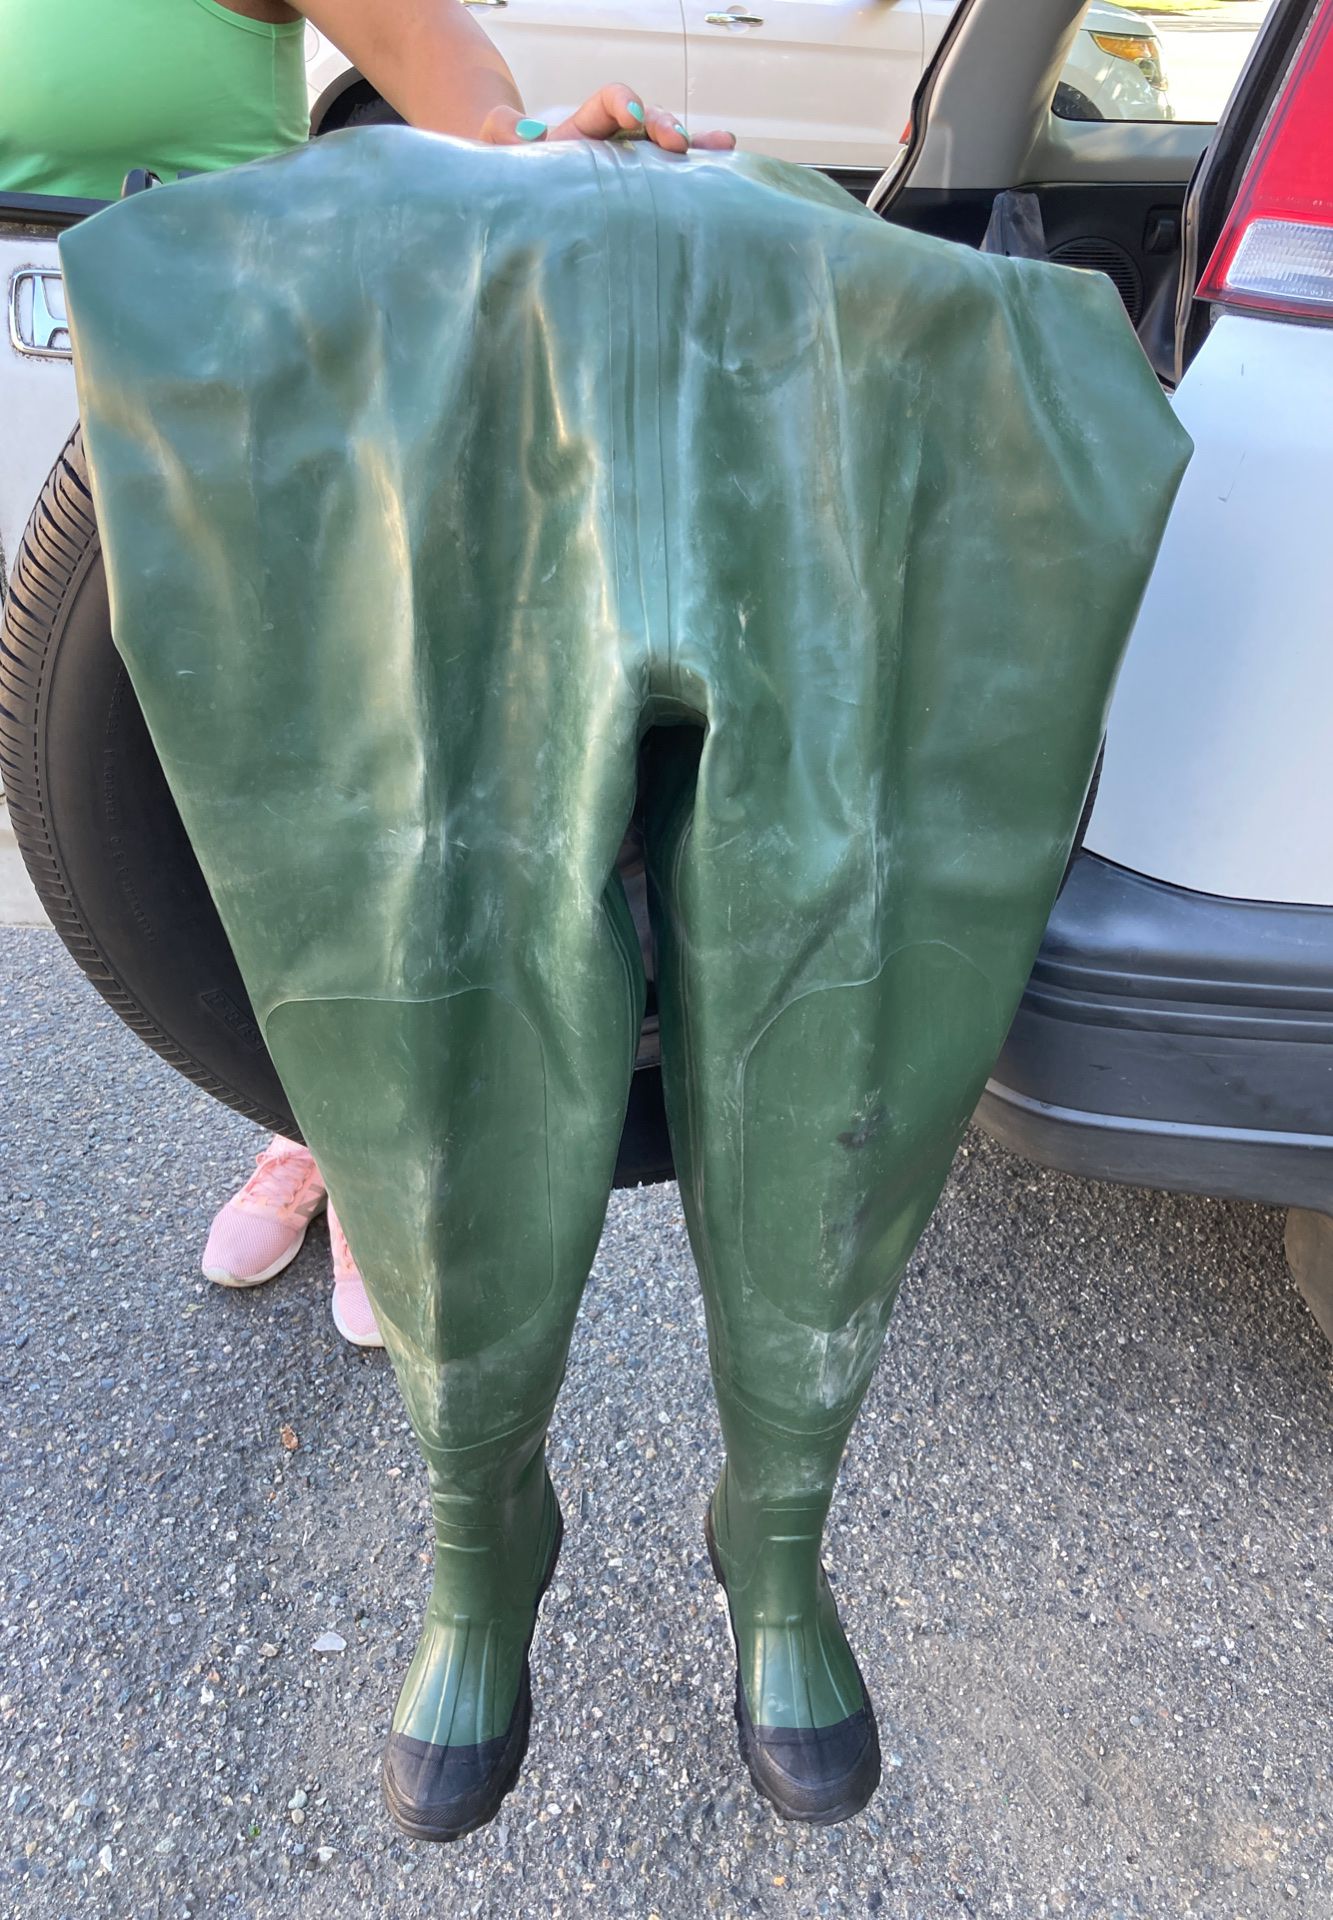 American Camper Vulcanized Rubber Chest Wader (size 6, feels like an 8?)